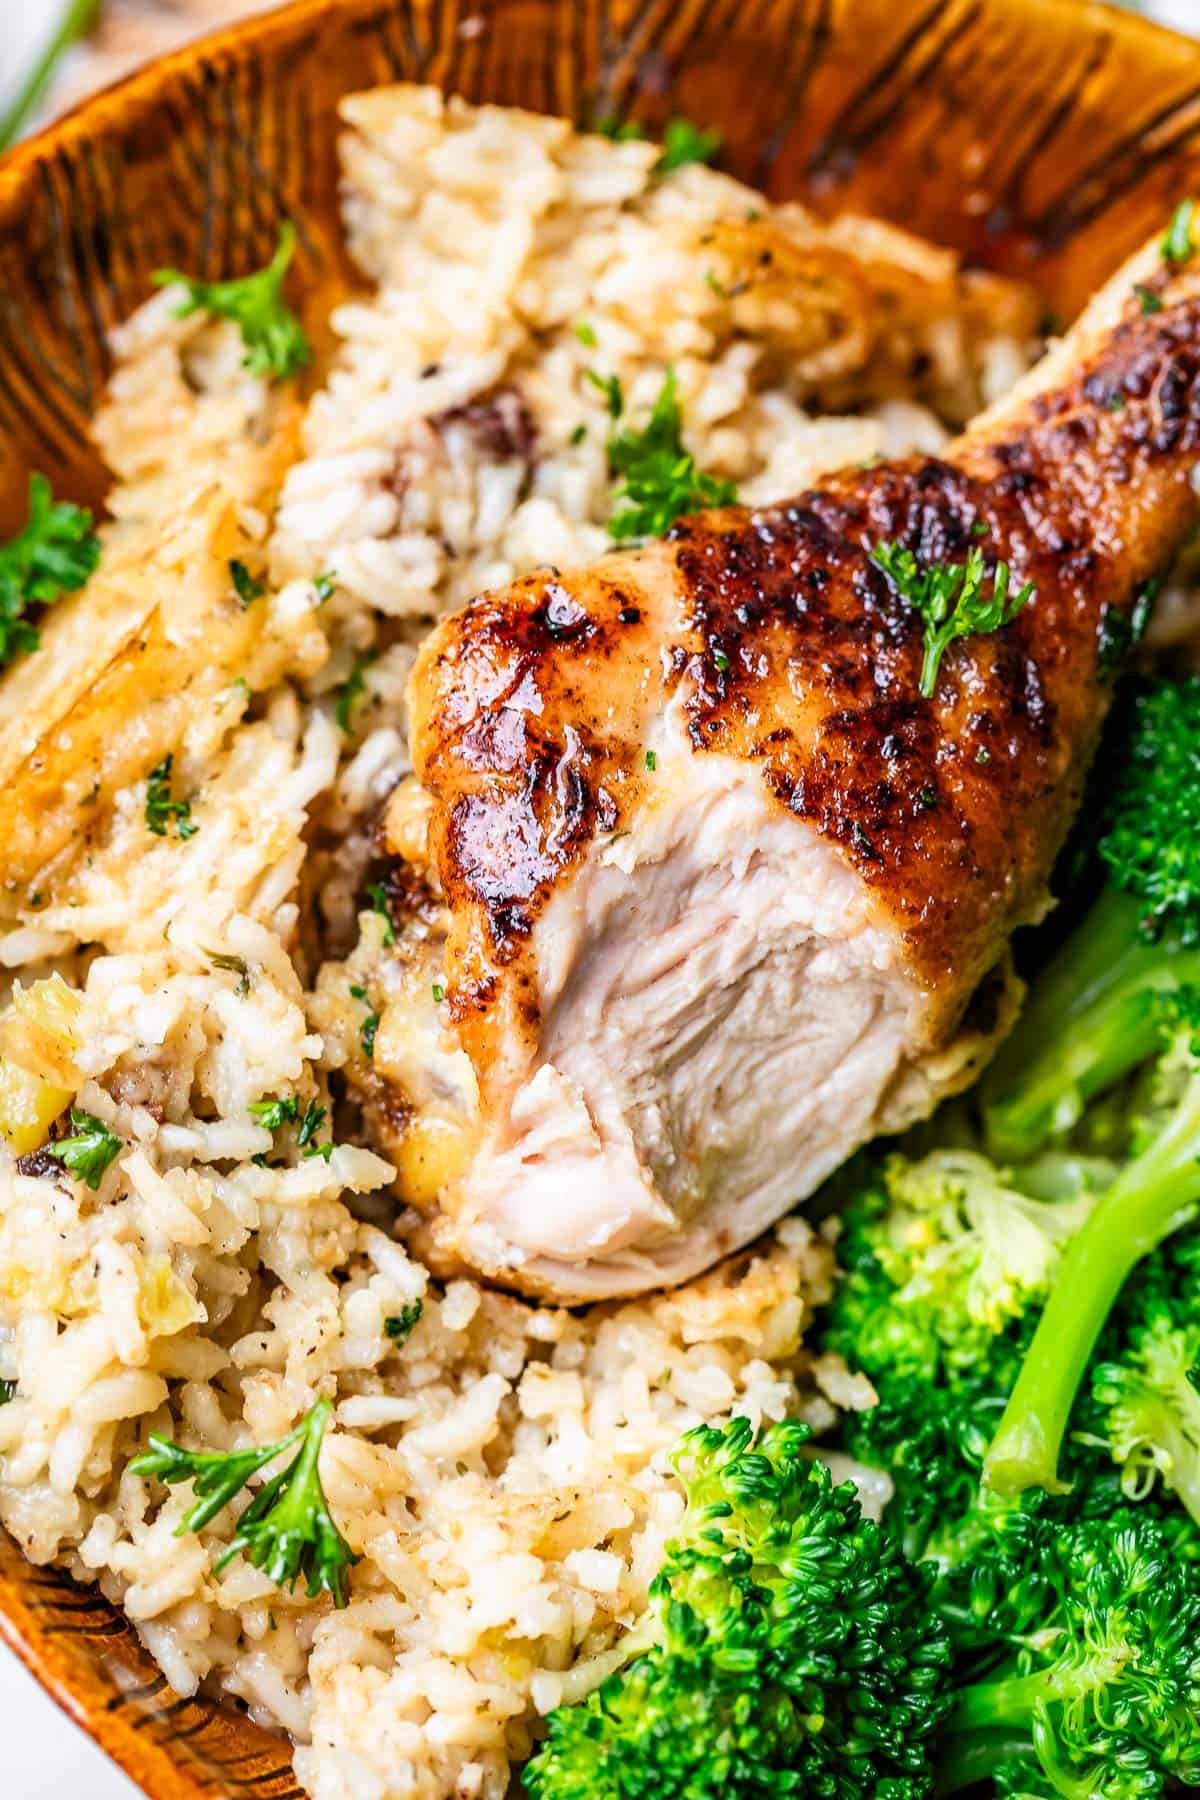 rice, broccoli, and chicken drumstick with bite taken out of it a wooden bowl.